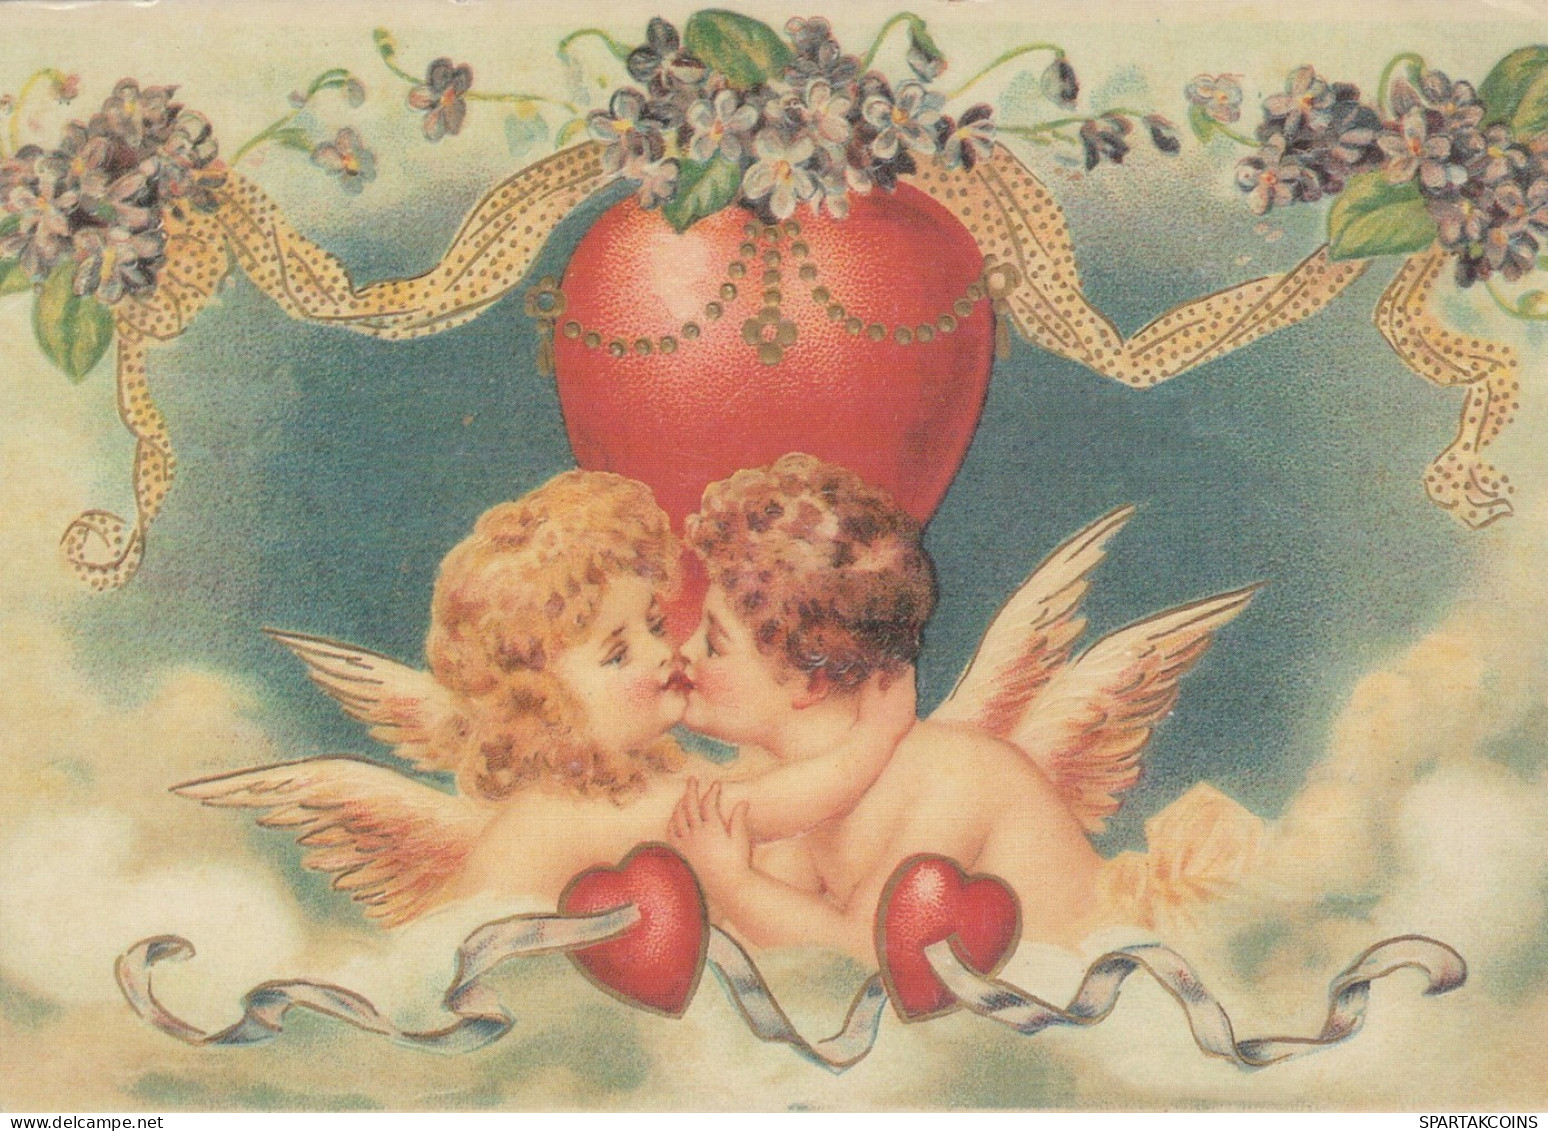 ANGELO Buon Anno Natale Vintage Cartolina CPSM #PAJ045.IT - Anges